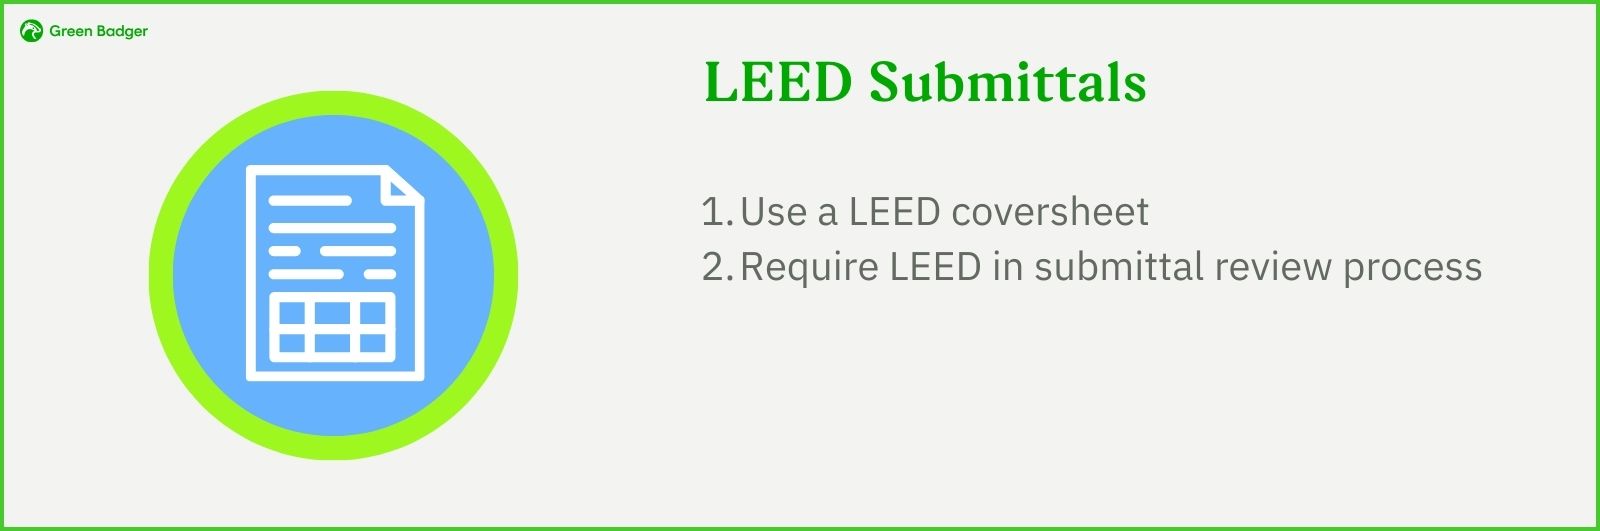 LEED Submittals